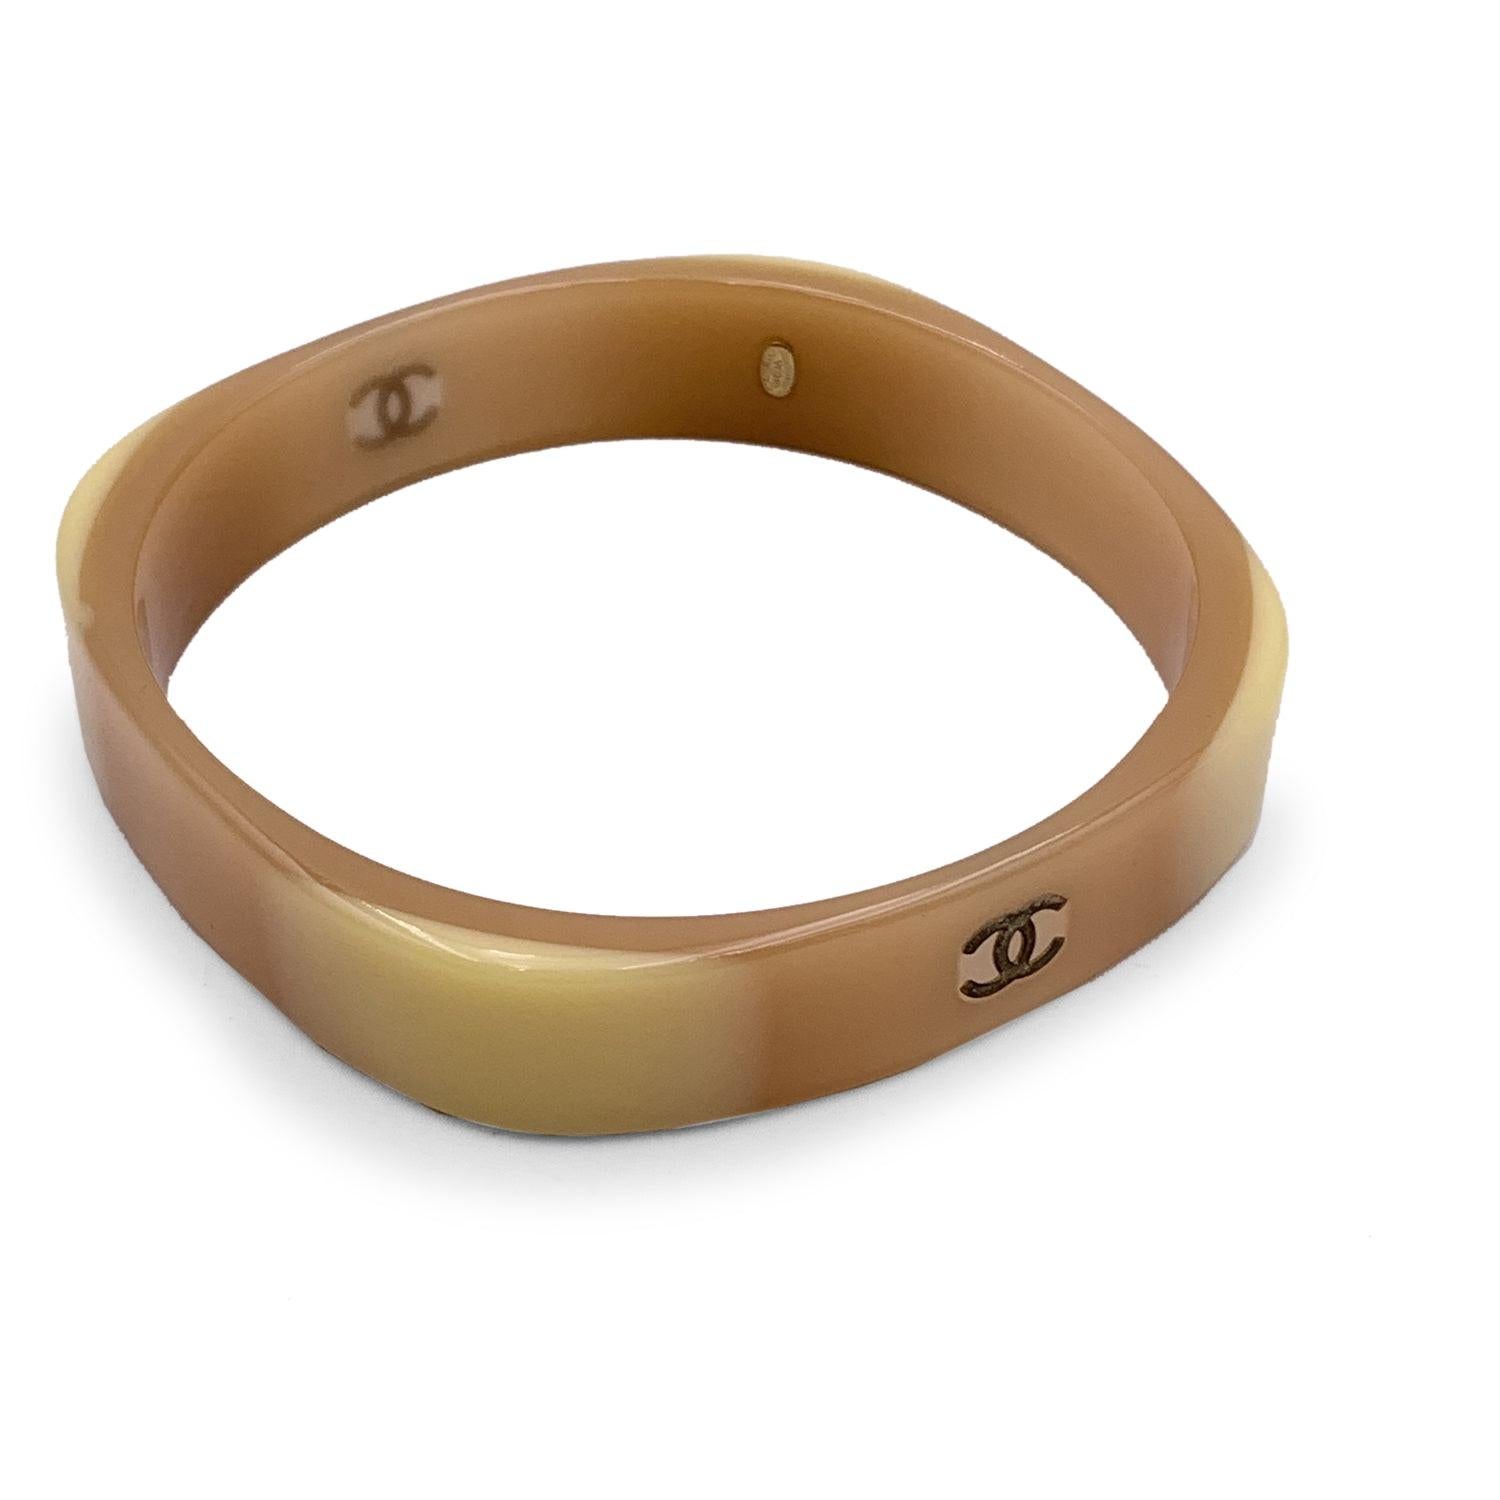 Lovely bangle cuff bracelet by CHANEL. Beige and tan resin with CC logo . Stamped 'Chanel 01 CC A Made in France' internally. Will fit up to approx. 7.75 inches - 19.7 cm wrist. Condition A - EXCELLENT Gently used. Please, look carefully at the